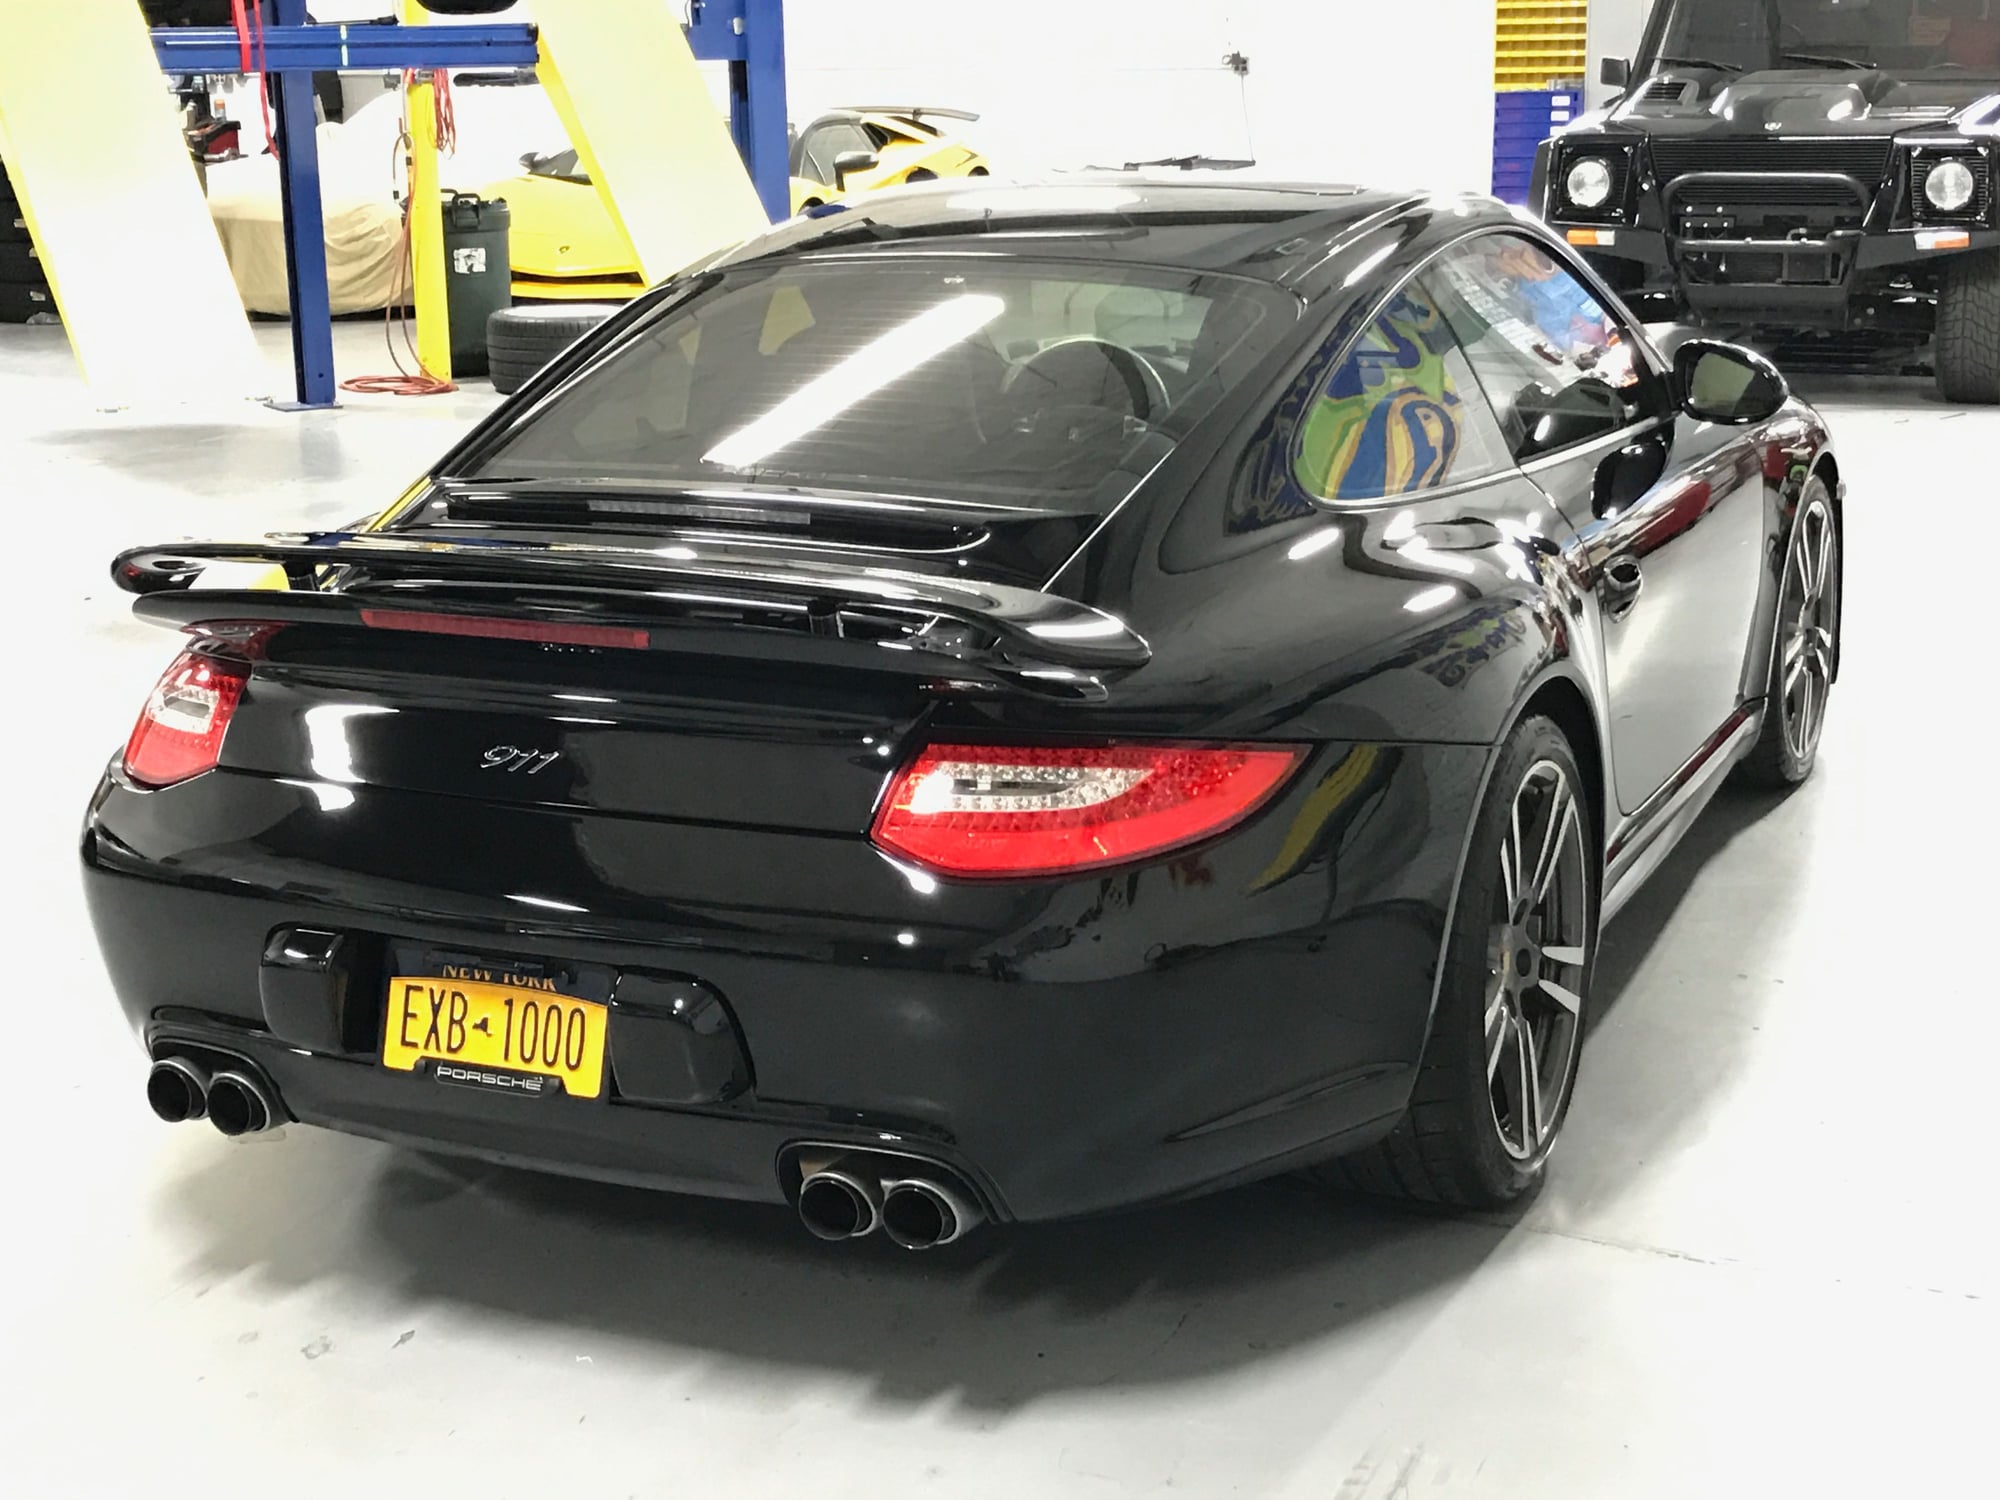 Exterior Body Parts - OEM ORIGINAL PORSCHE 997 911 TURBO S REAR WING SPOILER ENGINE LID COMPLETE IMMACULATE - Used - 2005 to 2012 Porsche Carrera - New York, NY 10012, United States